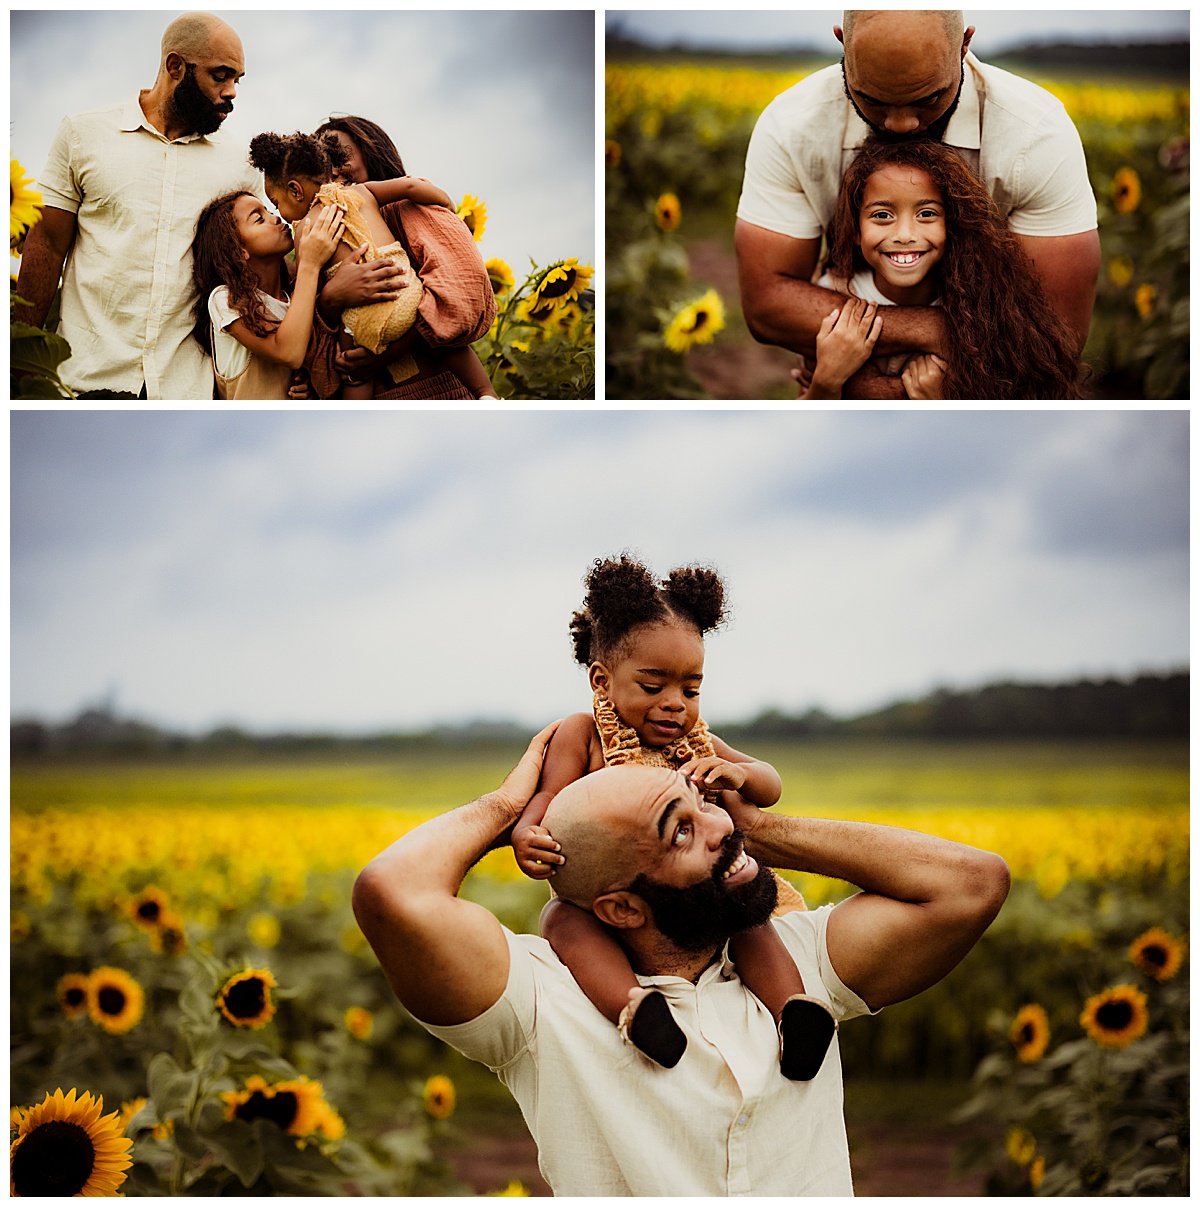 Dad smiles and laughs with daughters during their sunflower photoshoot